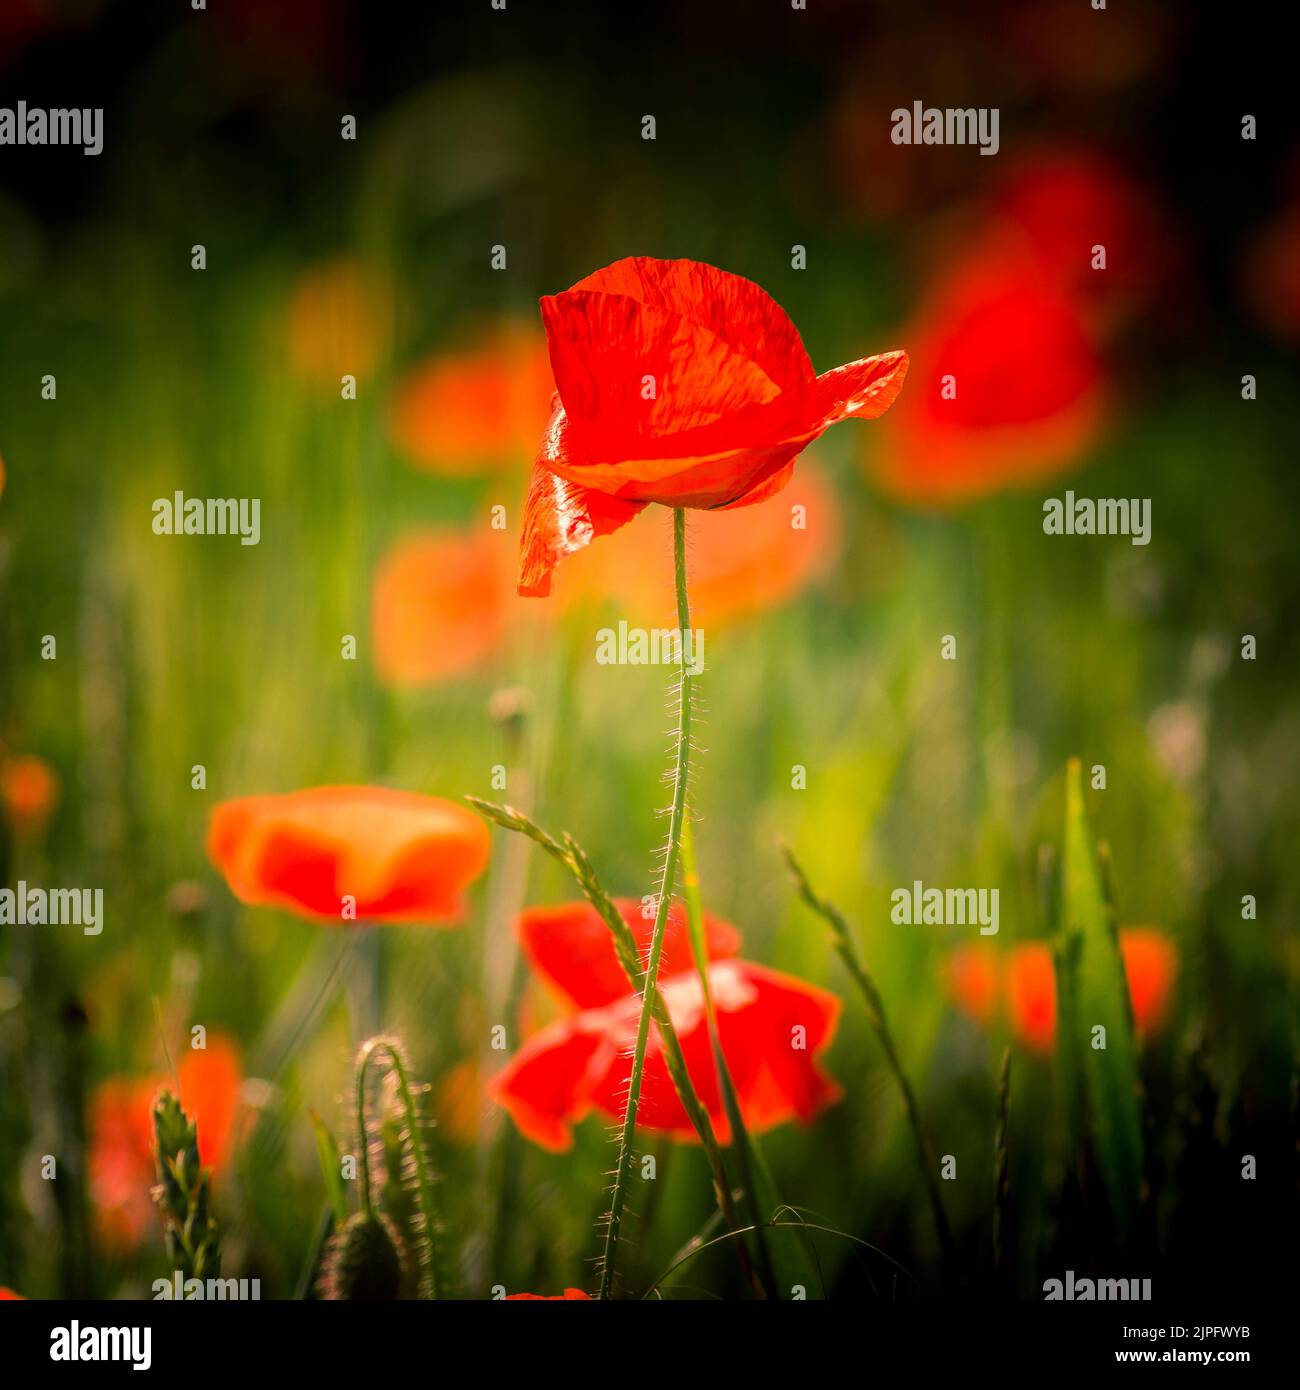 A field of red poppy flowers Stock Photo